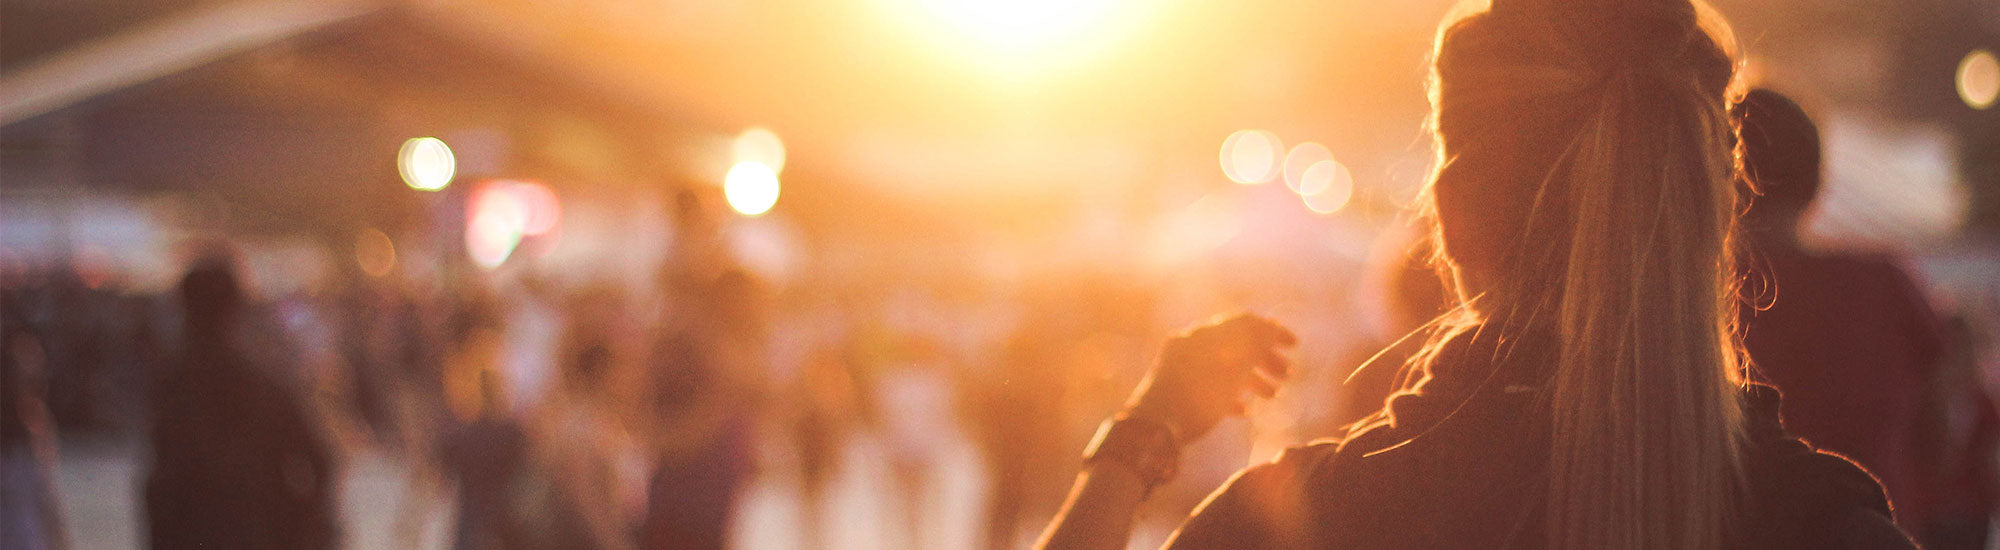 How to Experience Summer Festivals and Stick to Your Health Goals